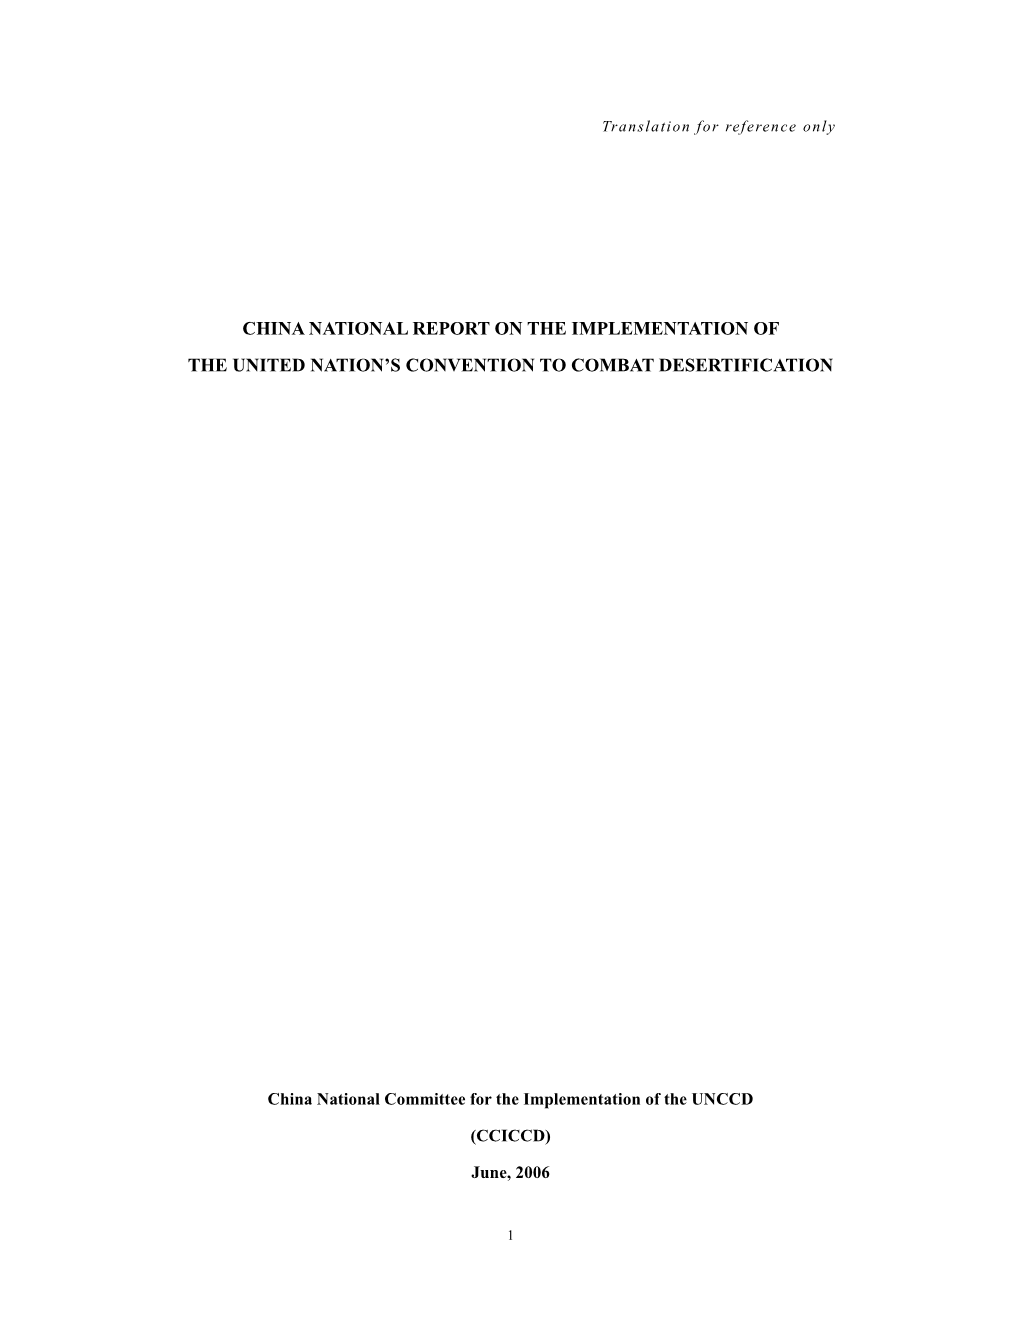 China National Report on the Implementation of the United Nation’S Convention to Combat Desertification